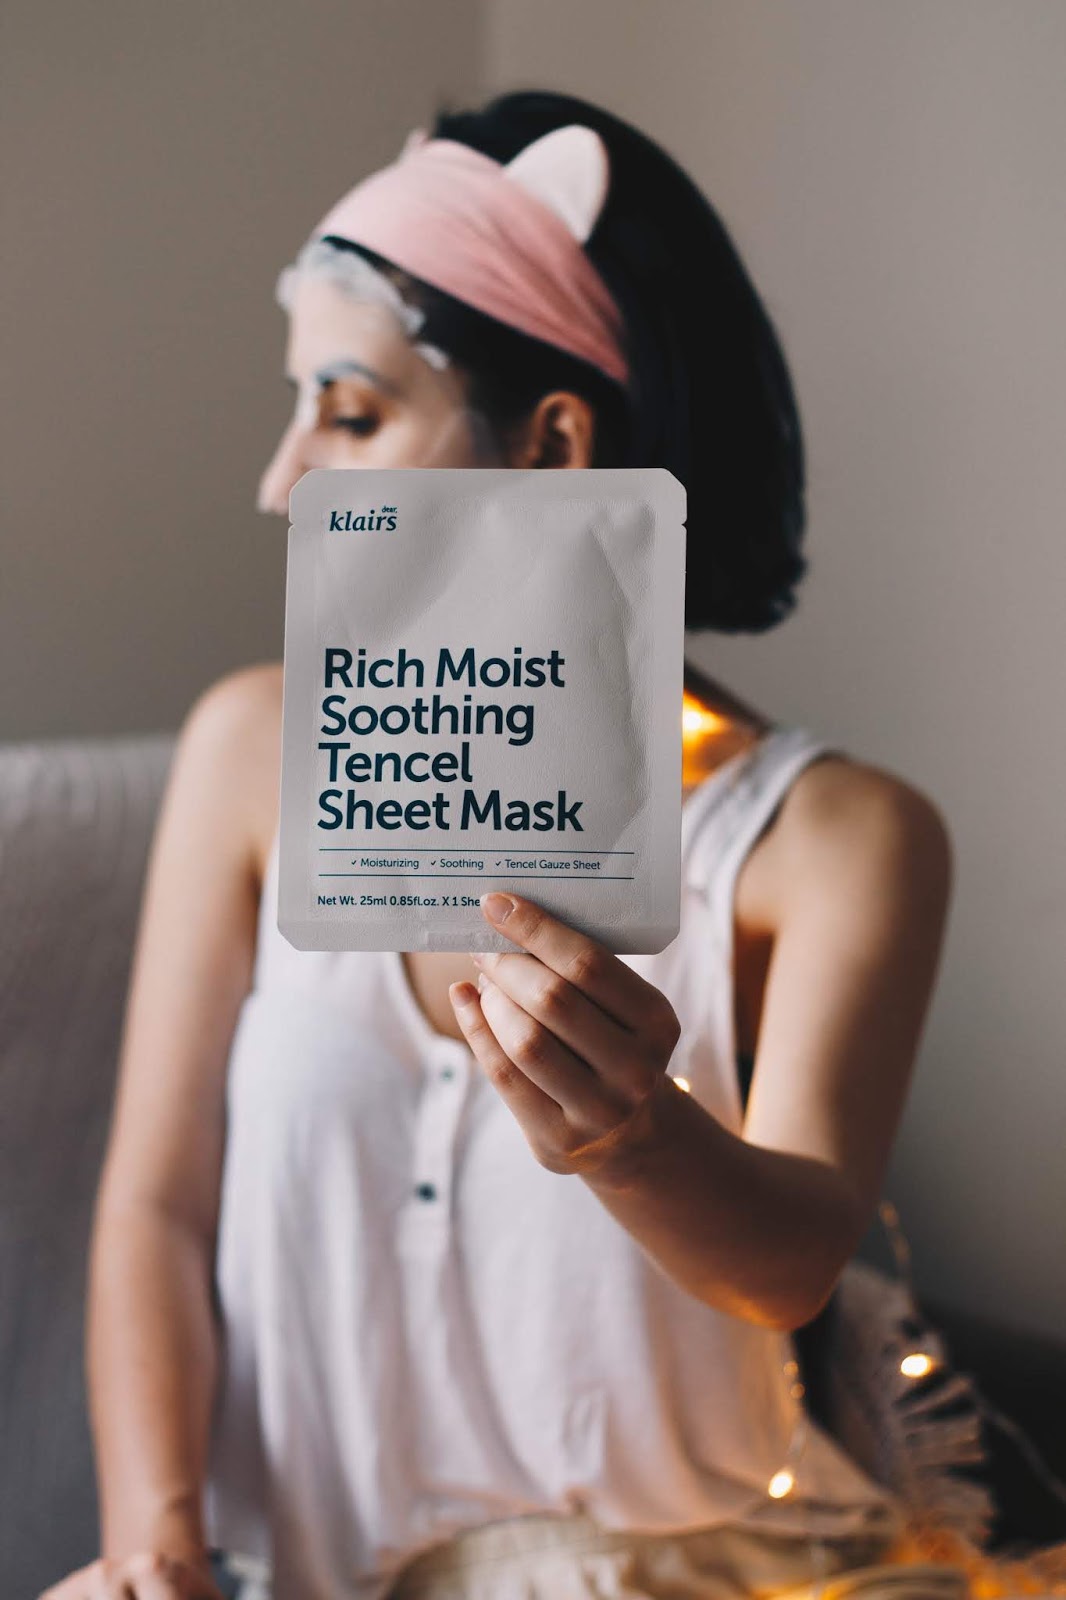 Klairs is becoming one of my favorite Korean brands, and this time I tried a soothing and moisturizing sheet mask. It's formulated with aloe vera, panthenol, hyaluronic acid and other moisturizing ingredients to energize and moisturize the skin. Klairs respects the beauty of the environment and animals, and as such, this is a vegan mask (not all the brand's products are, but this is a 100% cruelty-free brand). Click to read more!